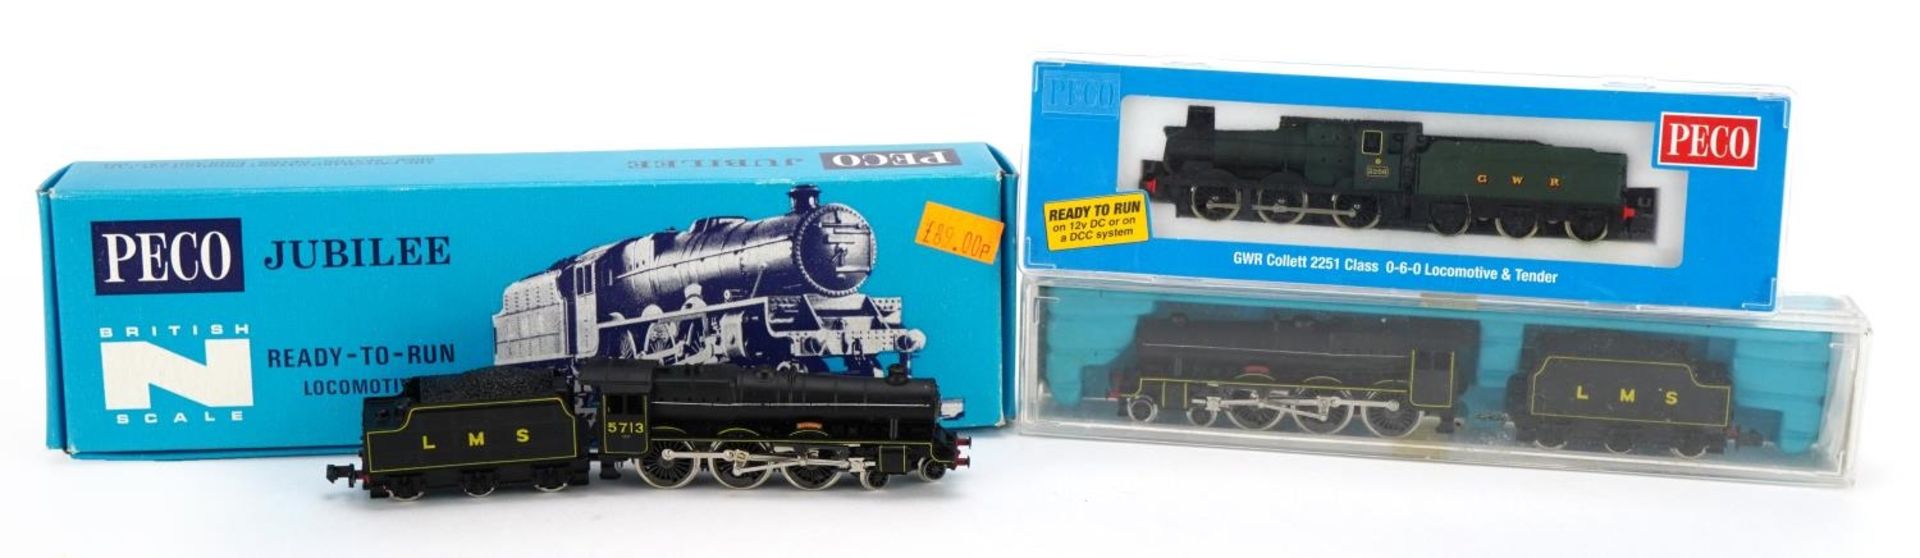 Three Peco N gauge model railway locomotives and tenders with boxes and cases, numbers NL-21, NL-